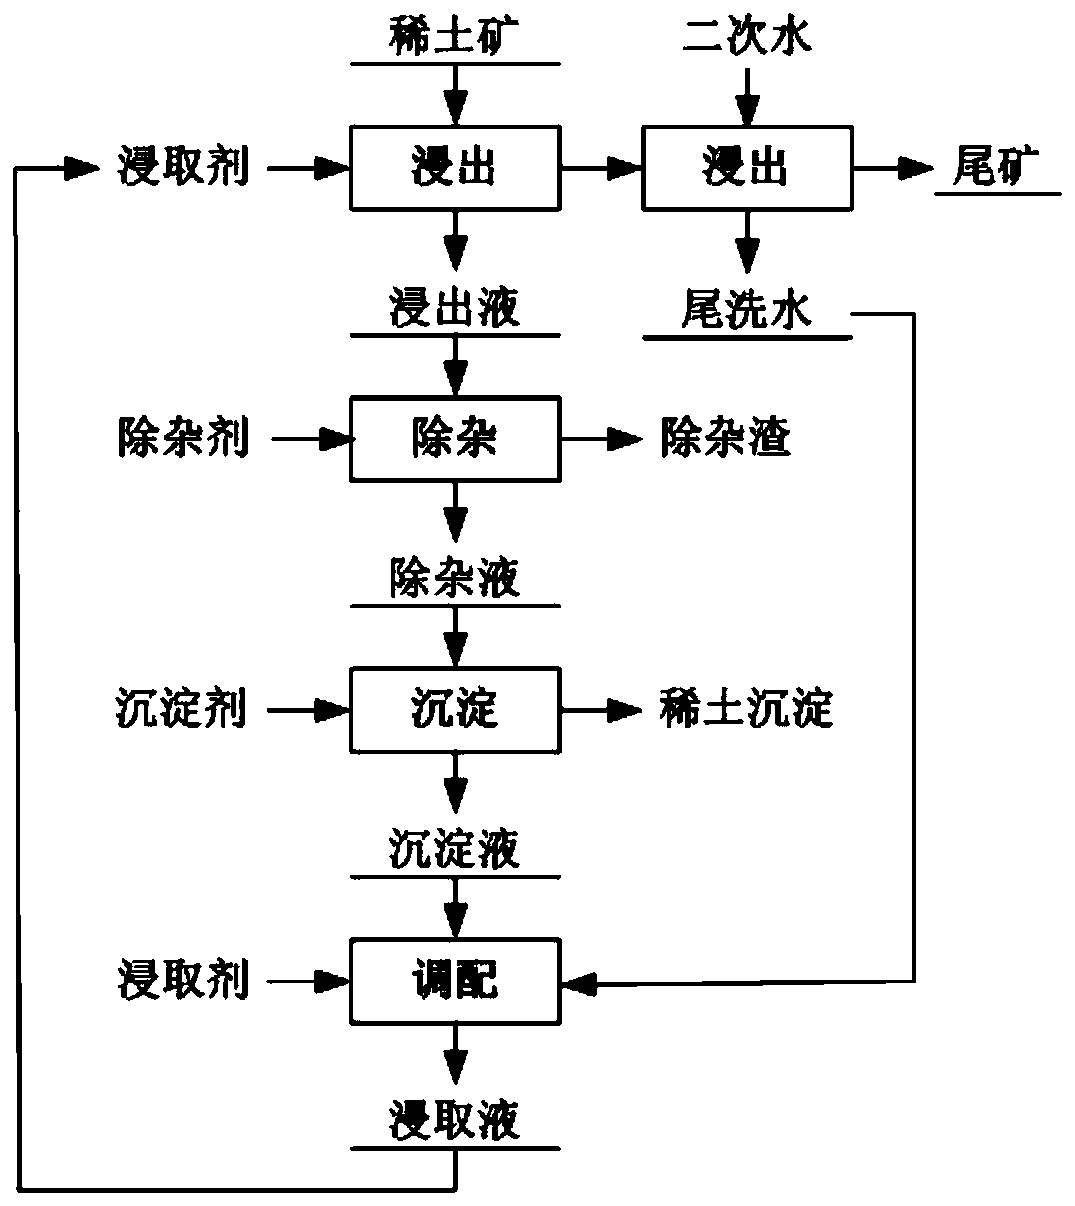 Ore leaching method of weathered crust ion-adsorption type rare earth ore and rare earth product